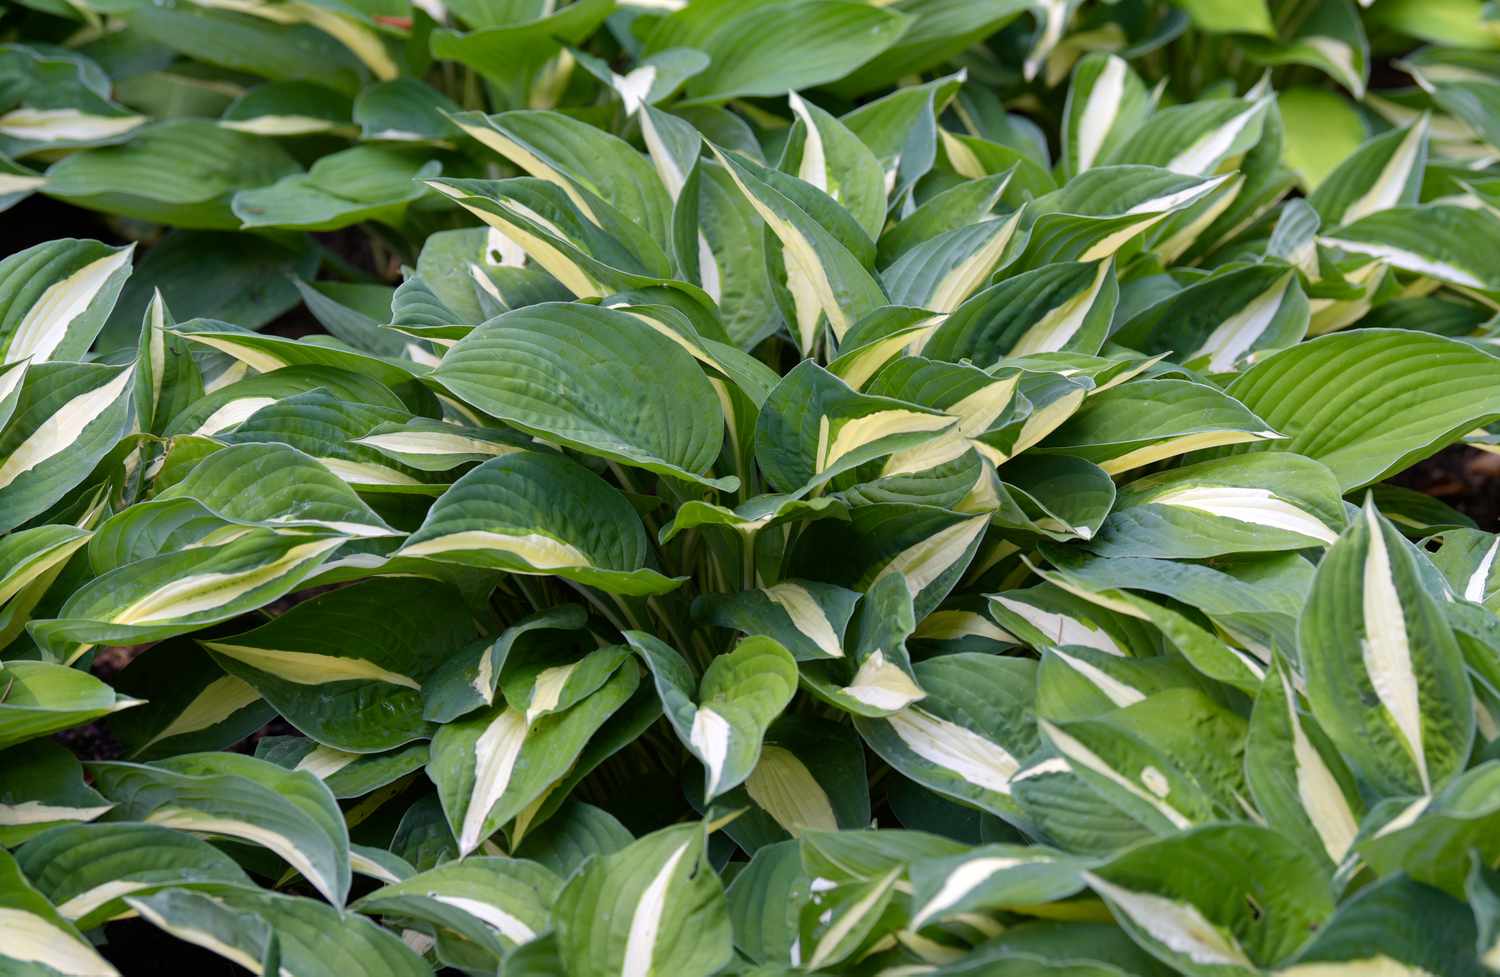 Hosta plant with variegated white, yellow and green leaves closeup